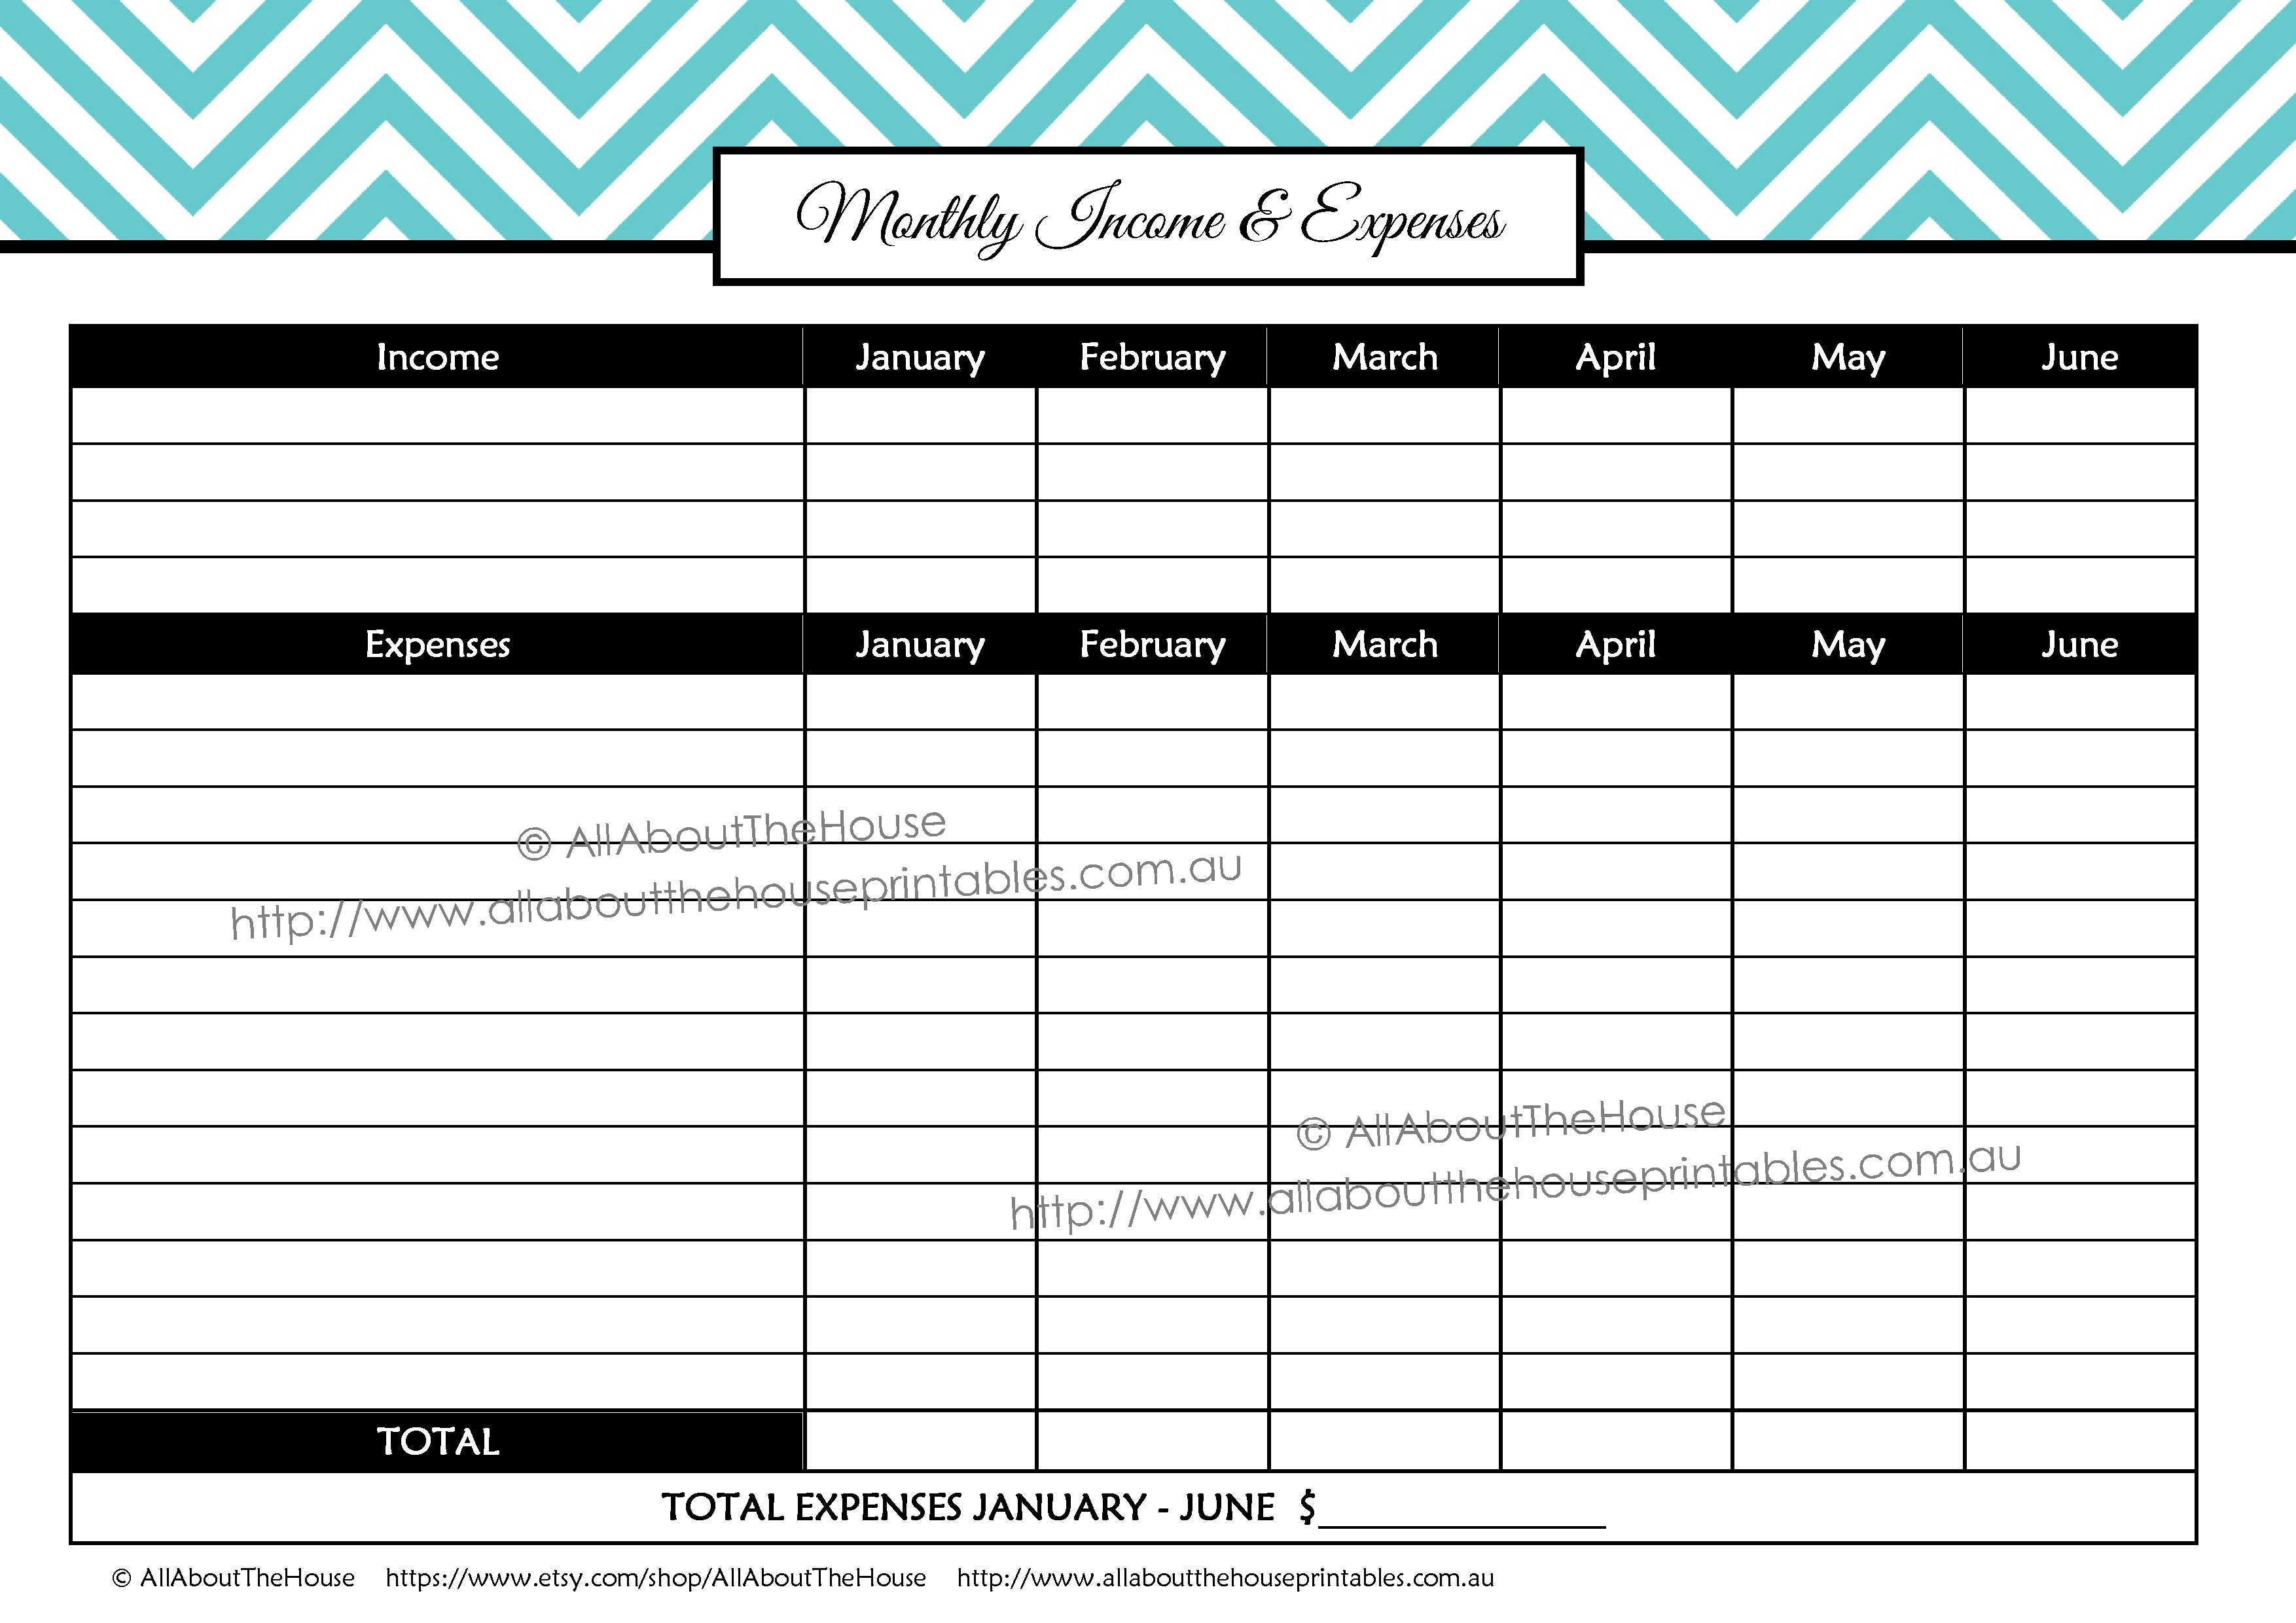 Upcoming Expenses | Allaboutthehouse Printables